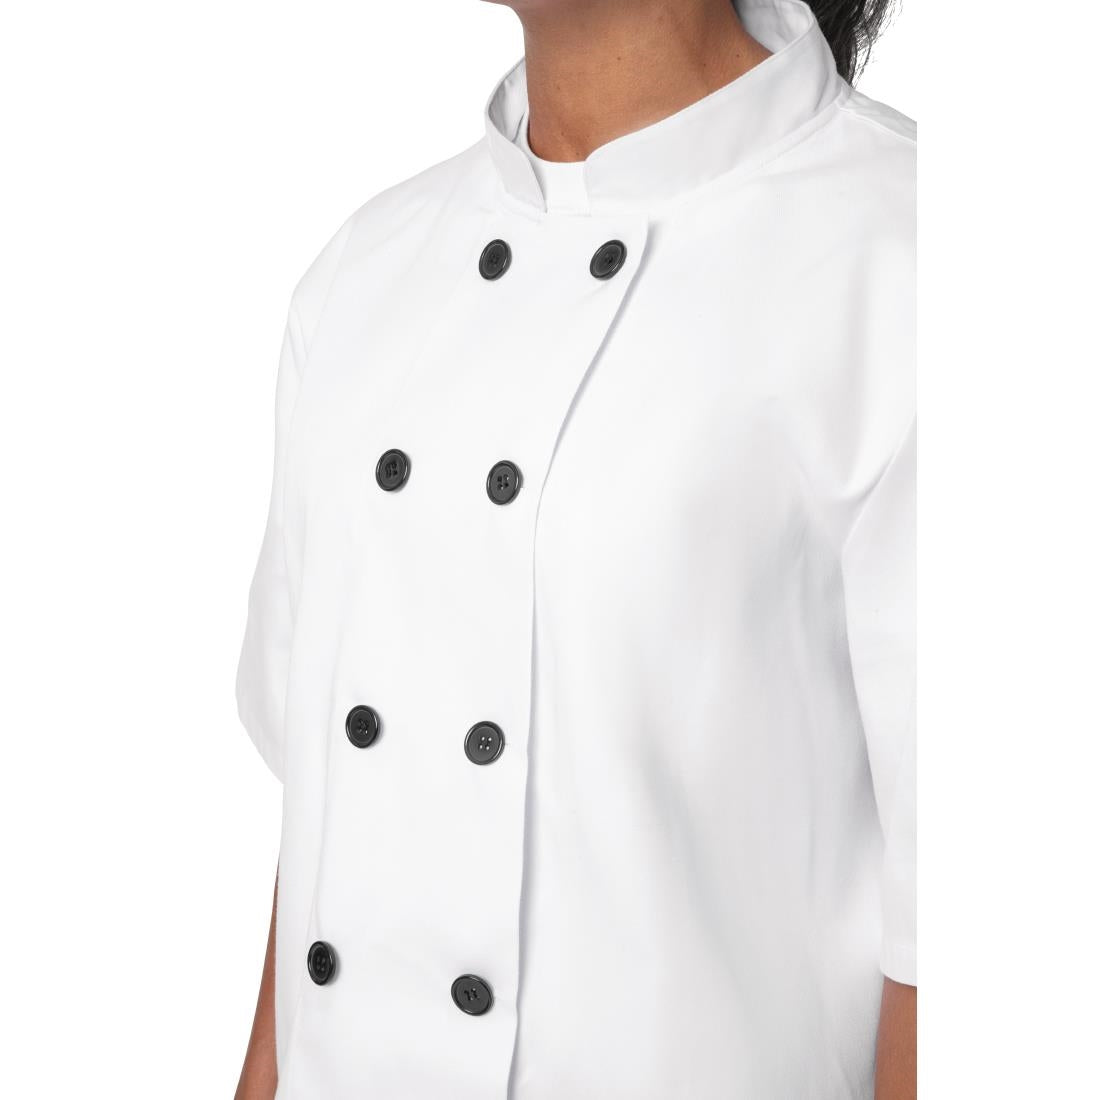 BB547-M Nisbets Essentials Short Sleeve Chefs Jacket White M (Pack of 2) JD Catering Equipment Solutions Ltd